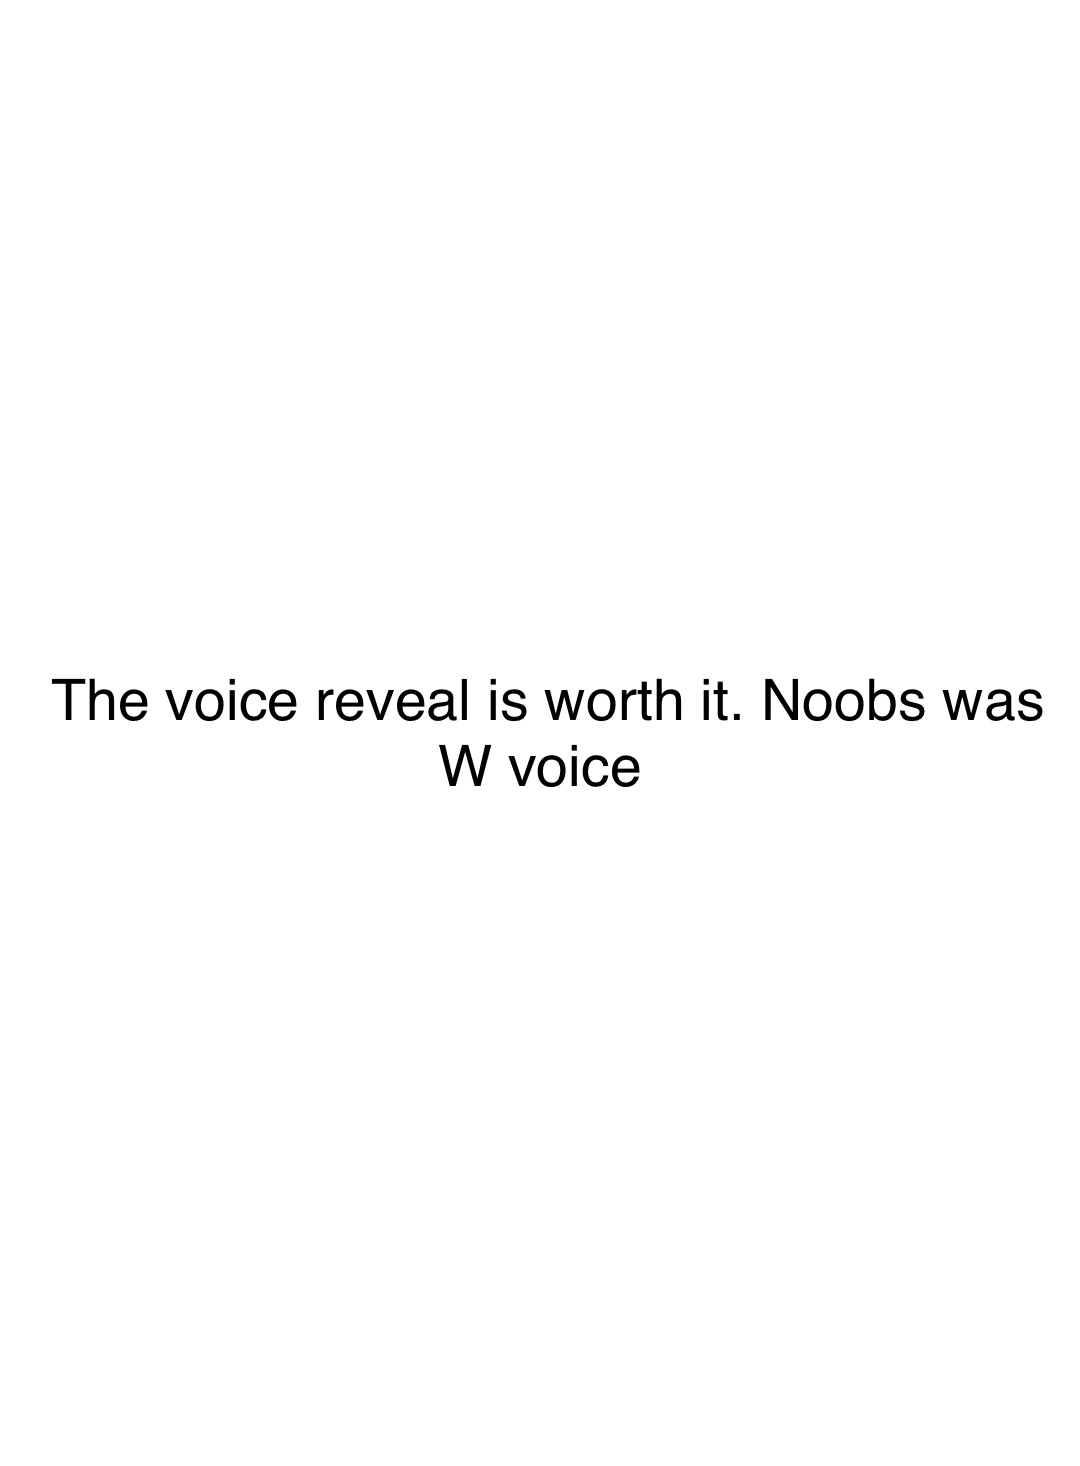 Double tap to edit The voice reveal is worth it. Noobs was W voice